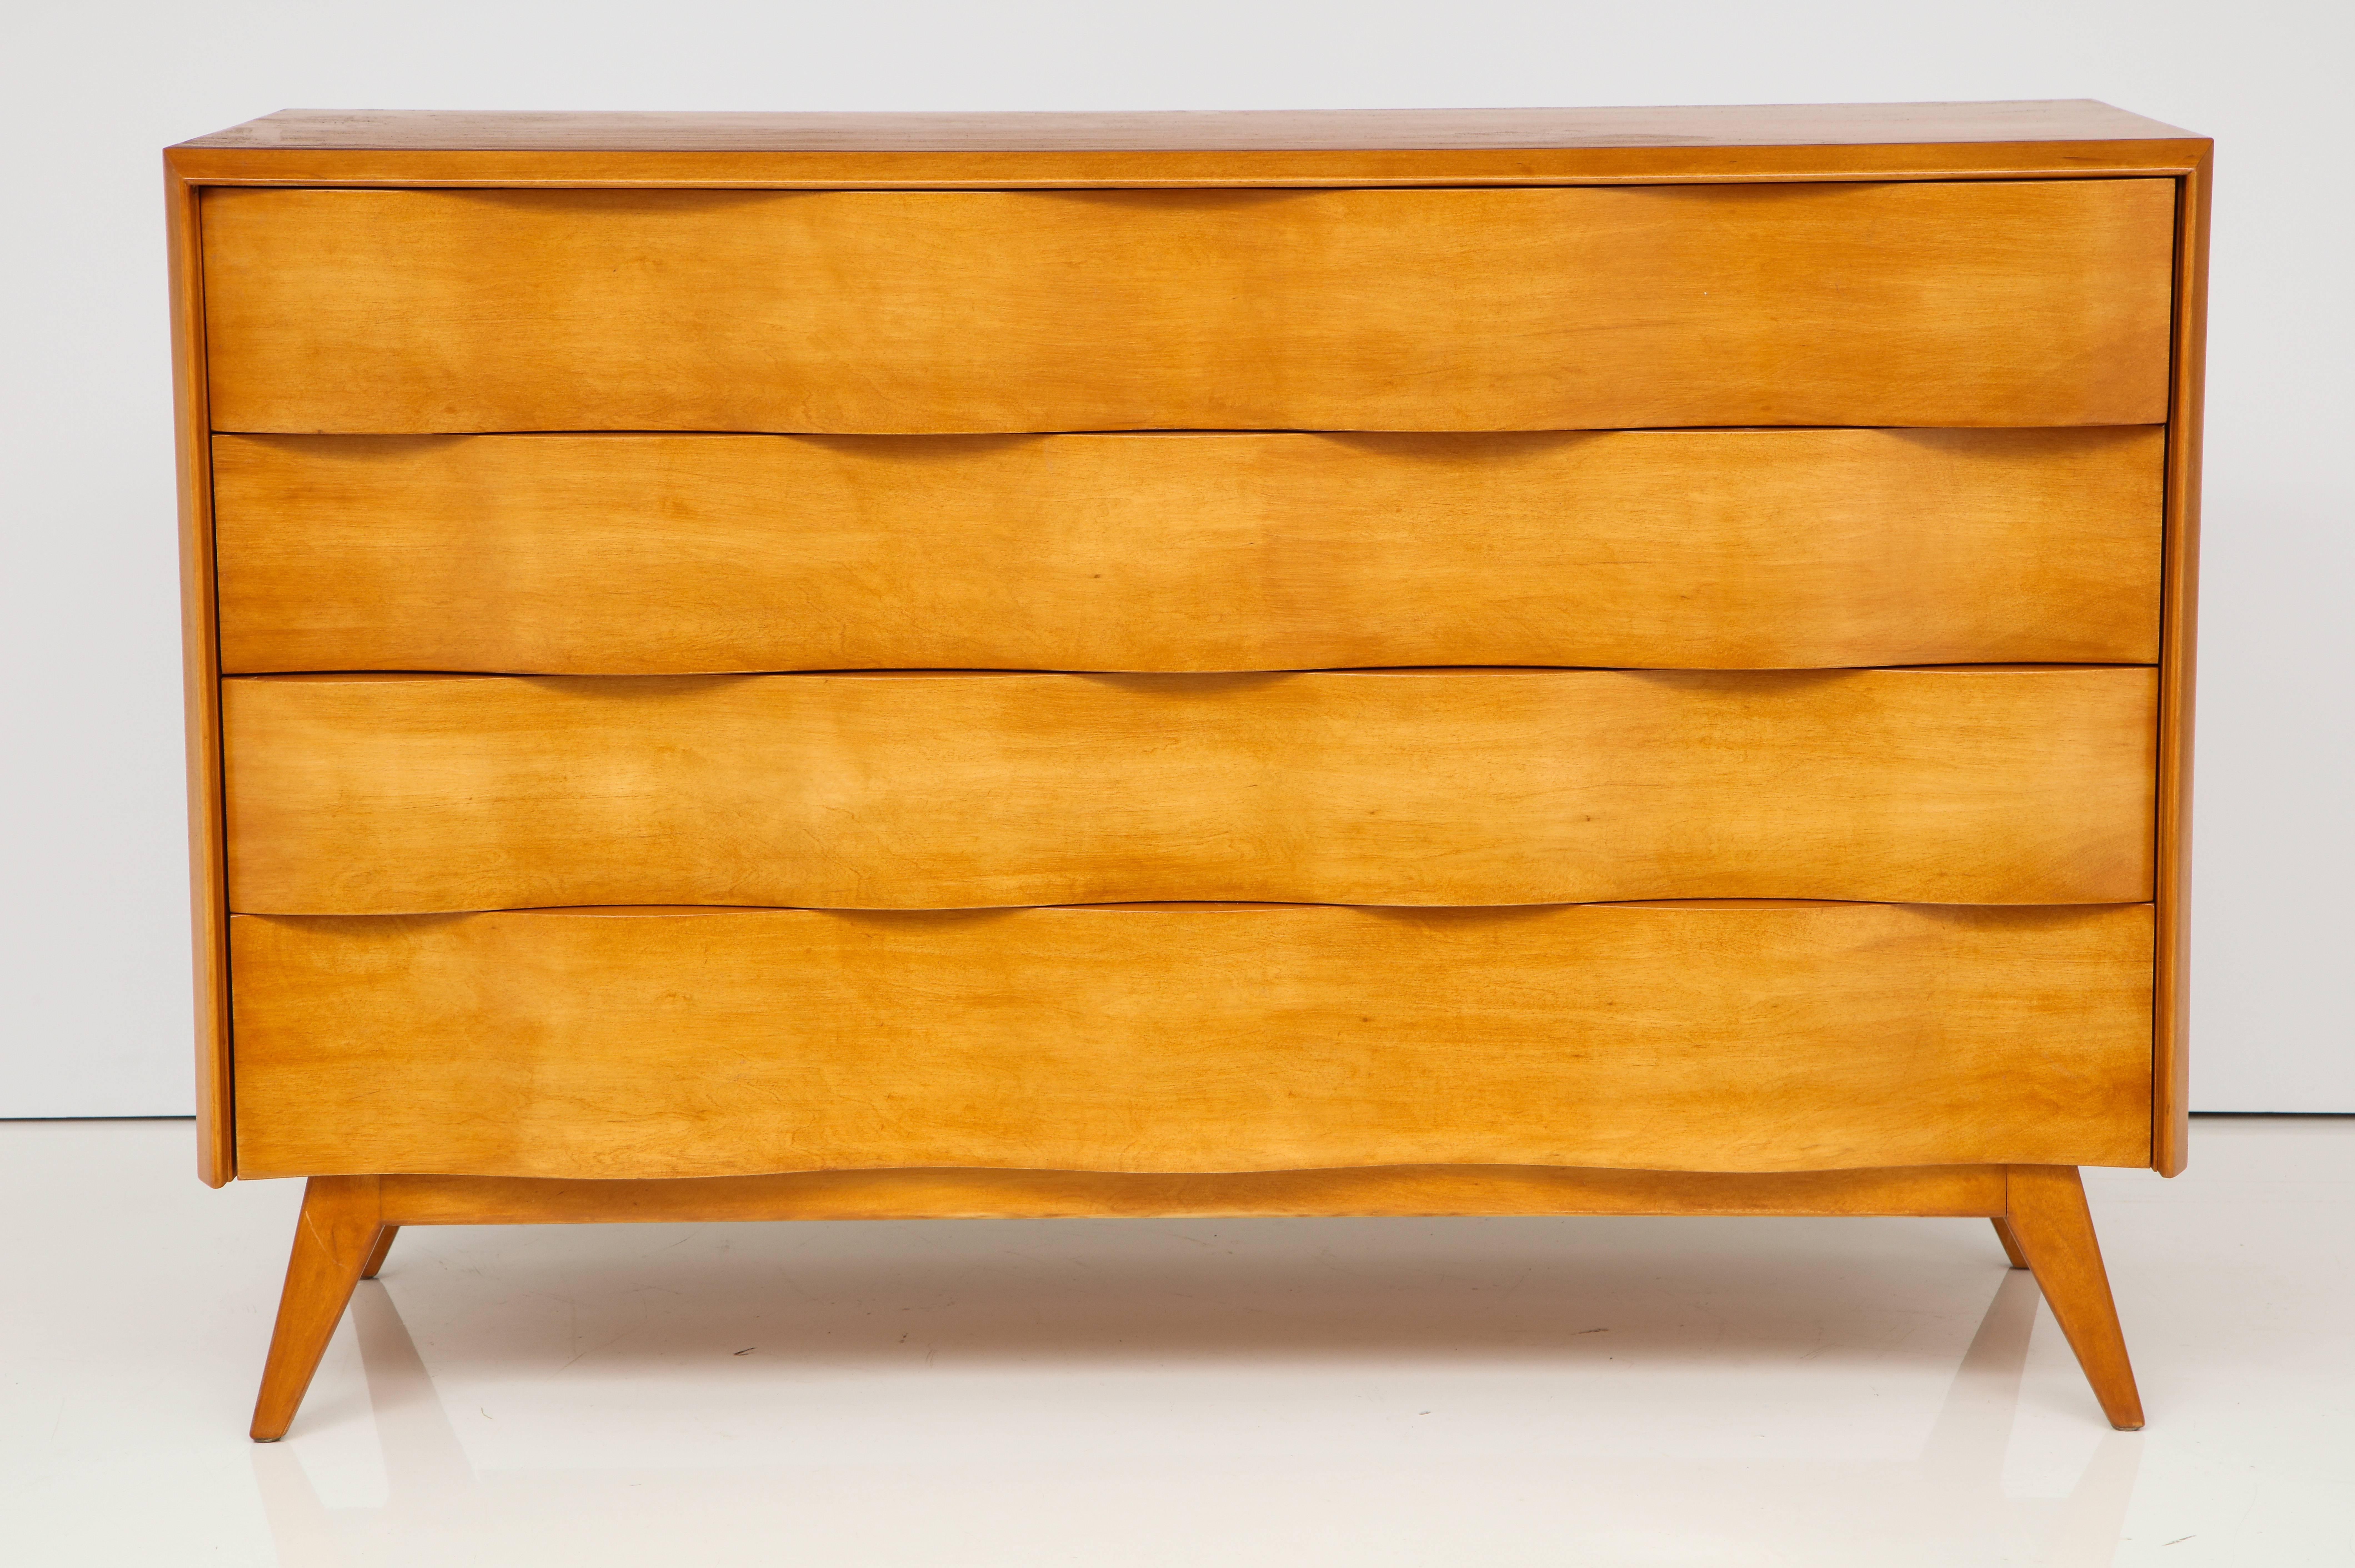 The furniture designed by Edmond Spence is always recognizable for it's distinctively different style. These chests have substantial storage capacity.